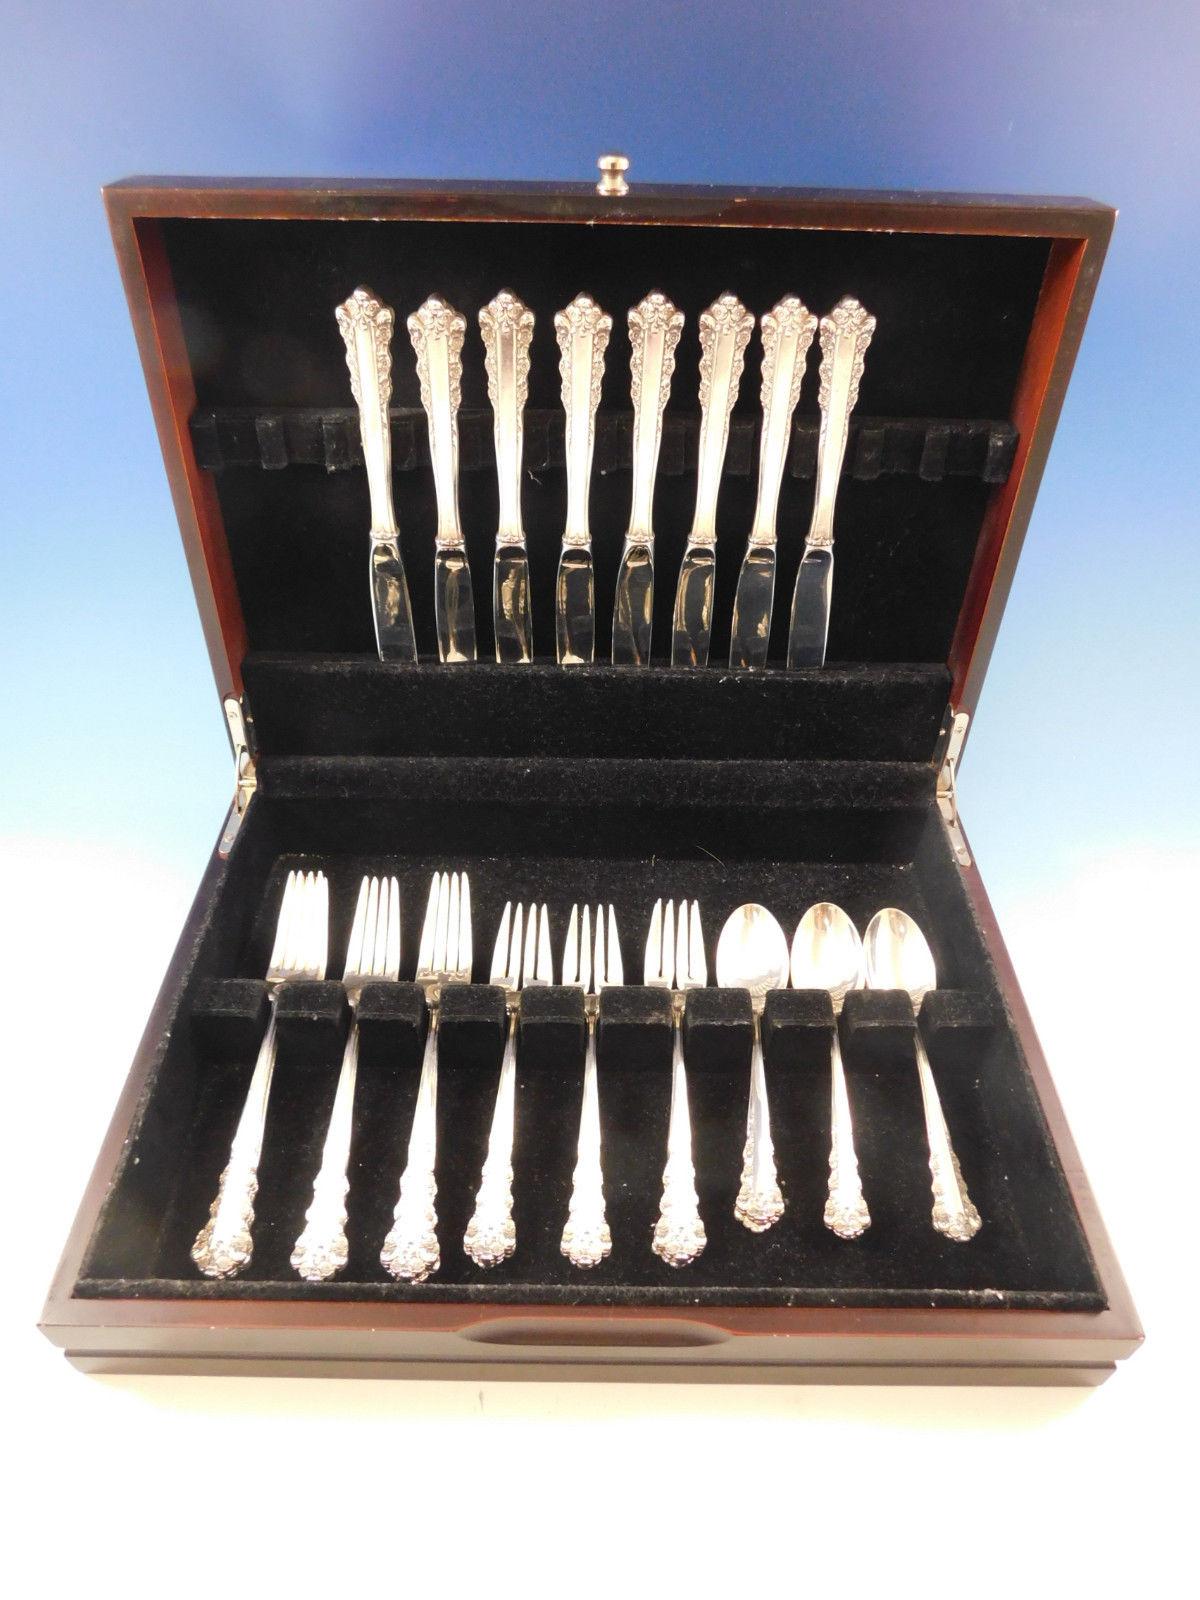 Experience heirloom quality luxury with this stunning Belle Meade by Lunt sterling silver flatware set, 32 pieces. This set includes:

8 knives, 9 1/8